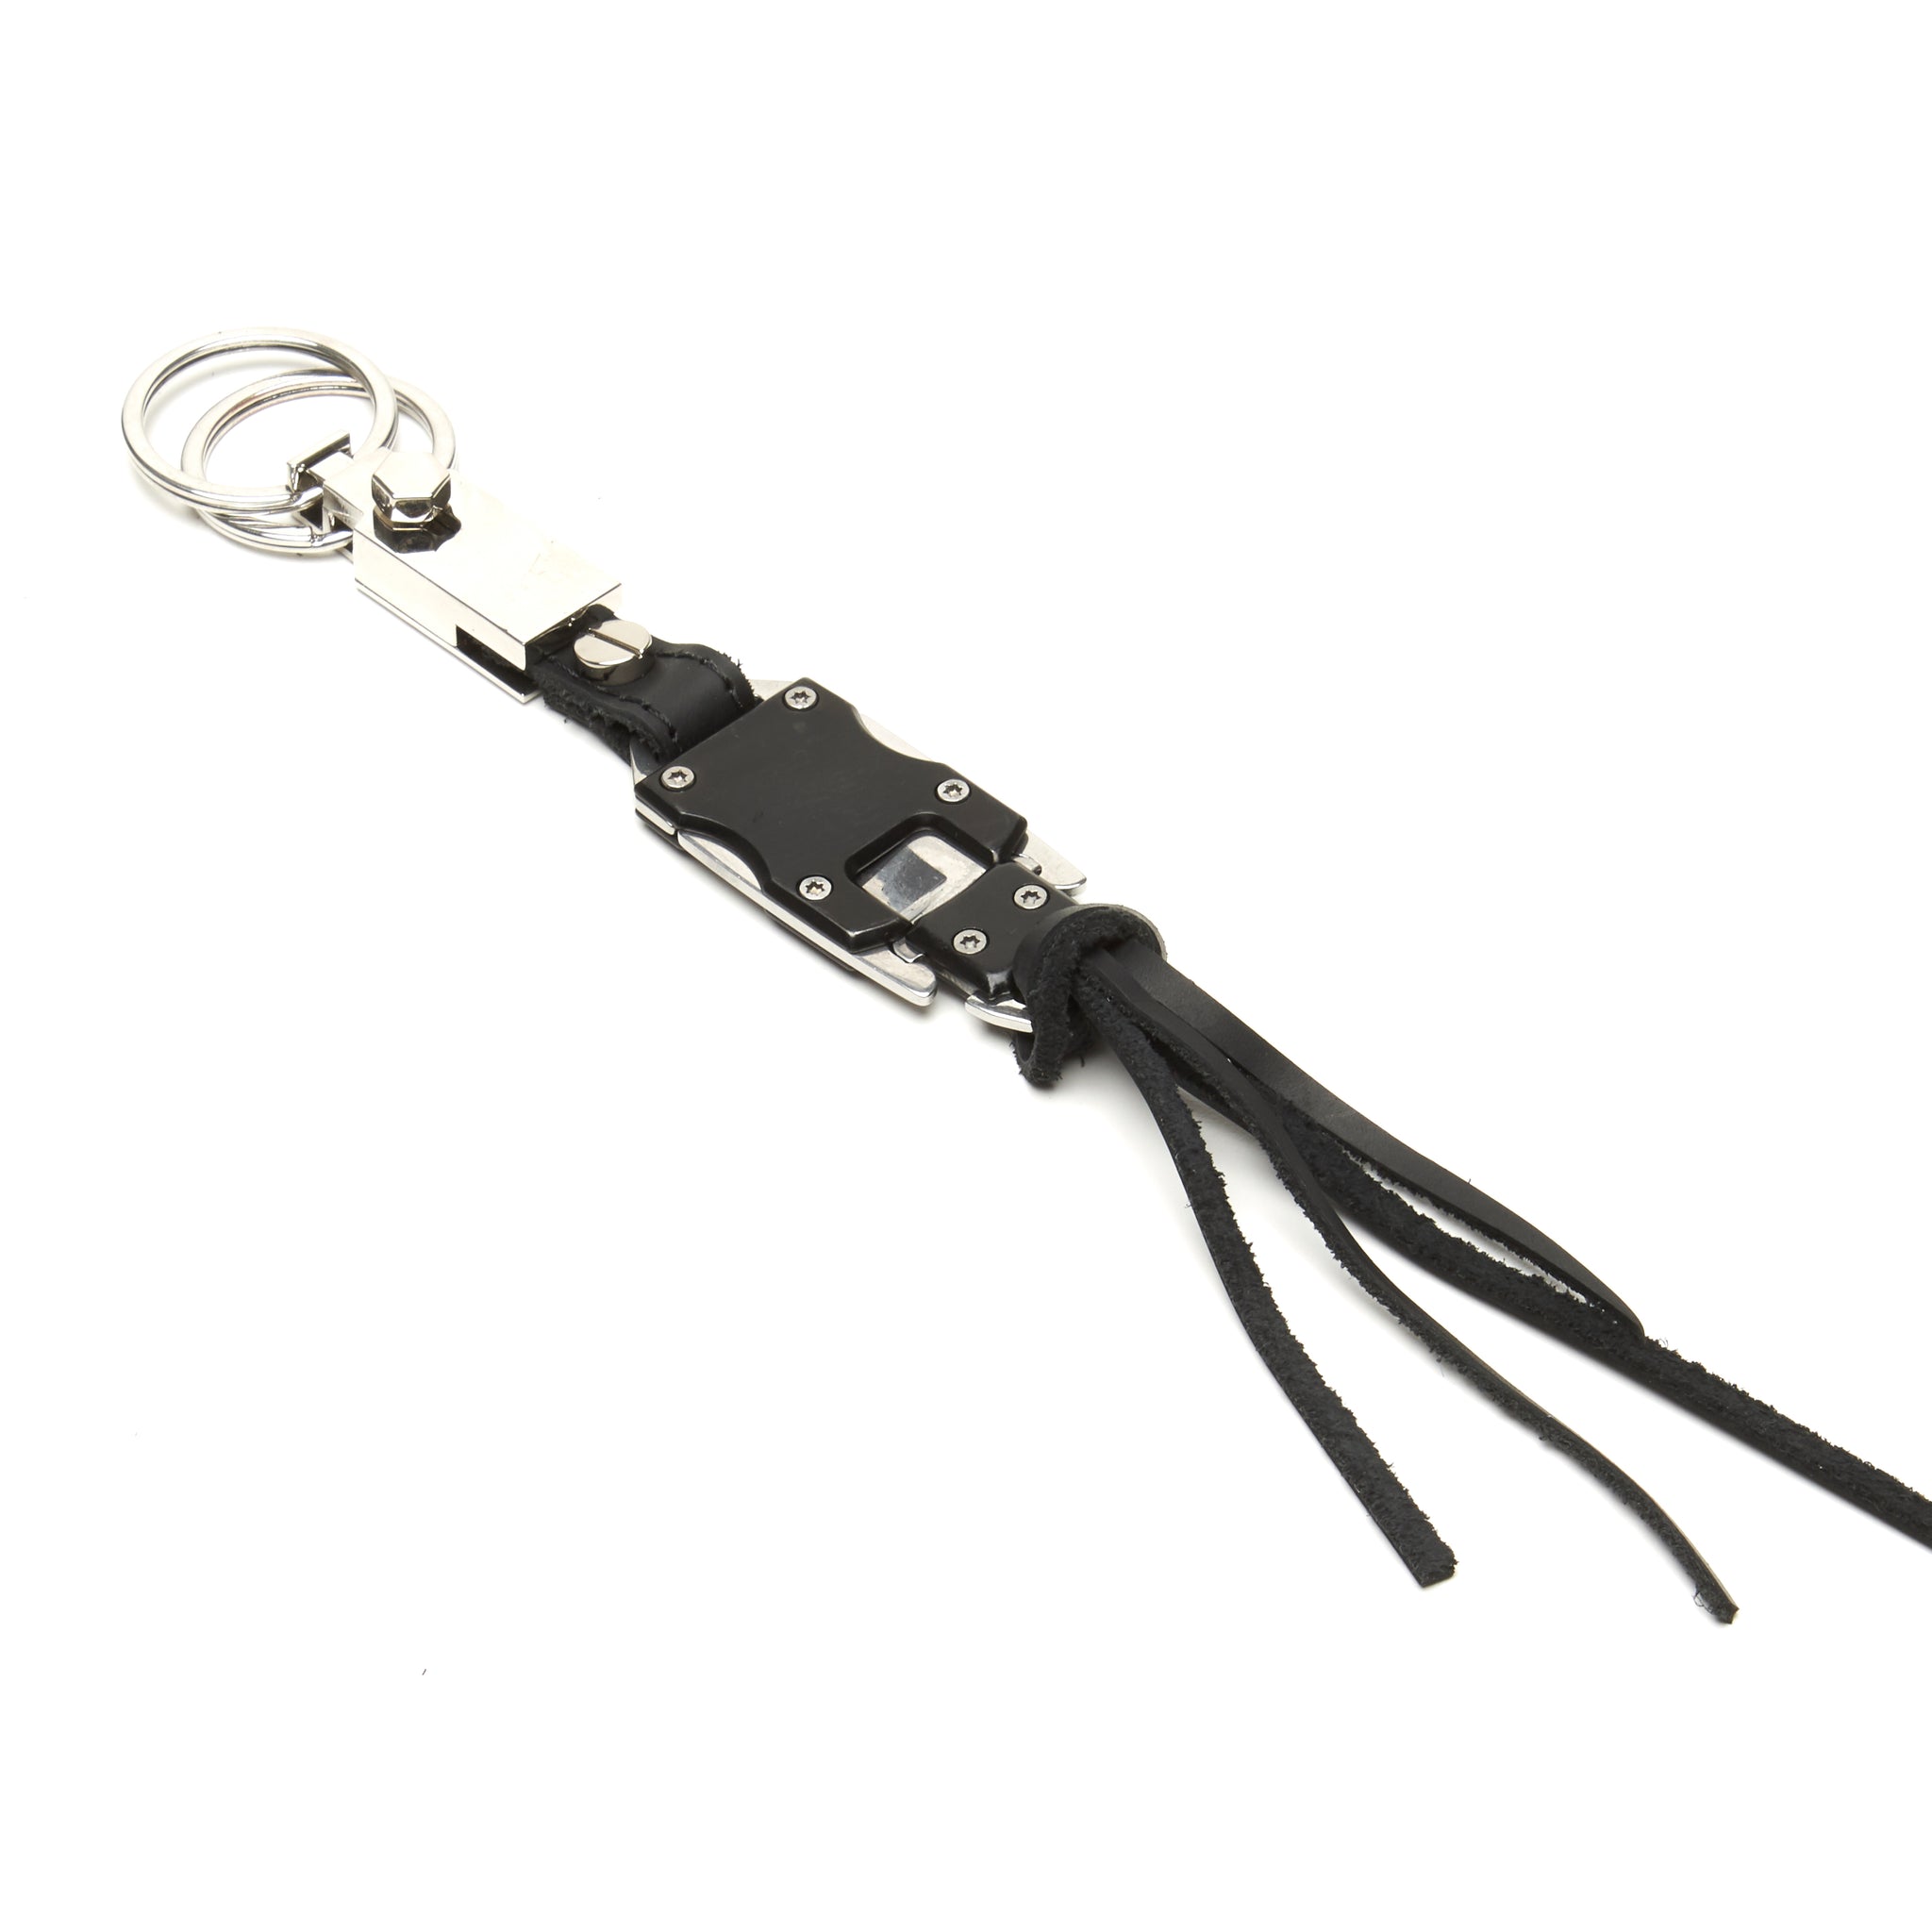 LEATHER KEY CHAIN WITH SQUEEZE BUTTON TO REVEAL HIDDEN SURVIVAL KNIFE by nyet jewelry